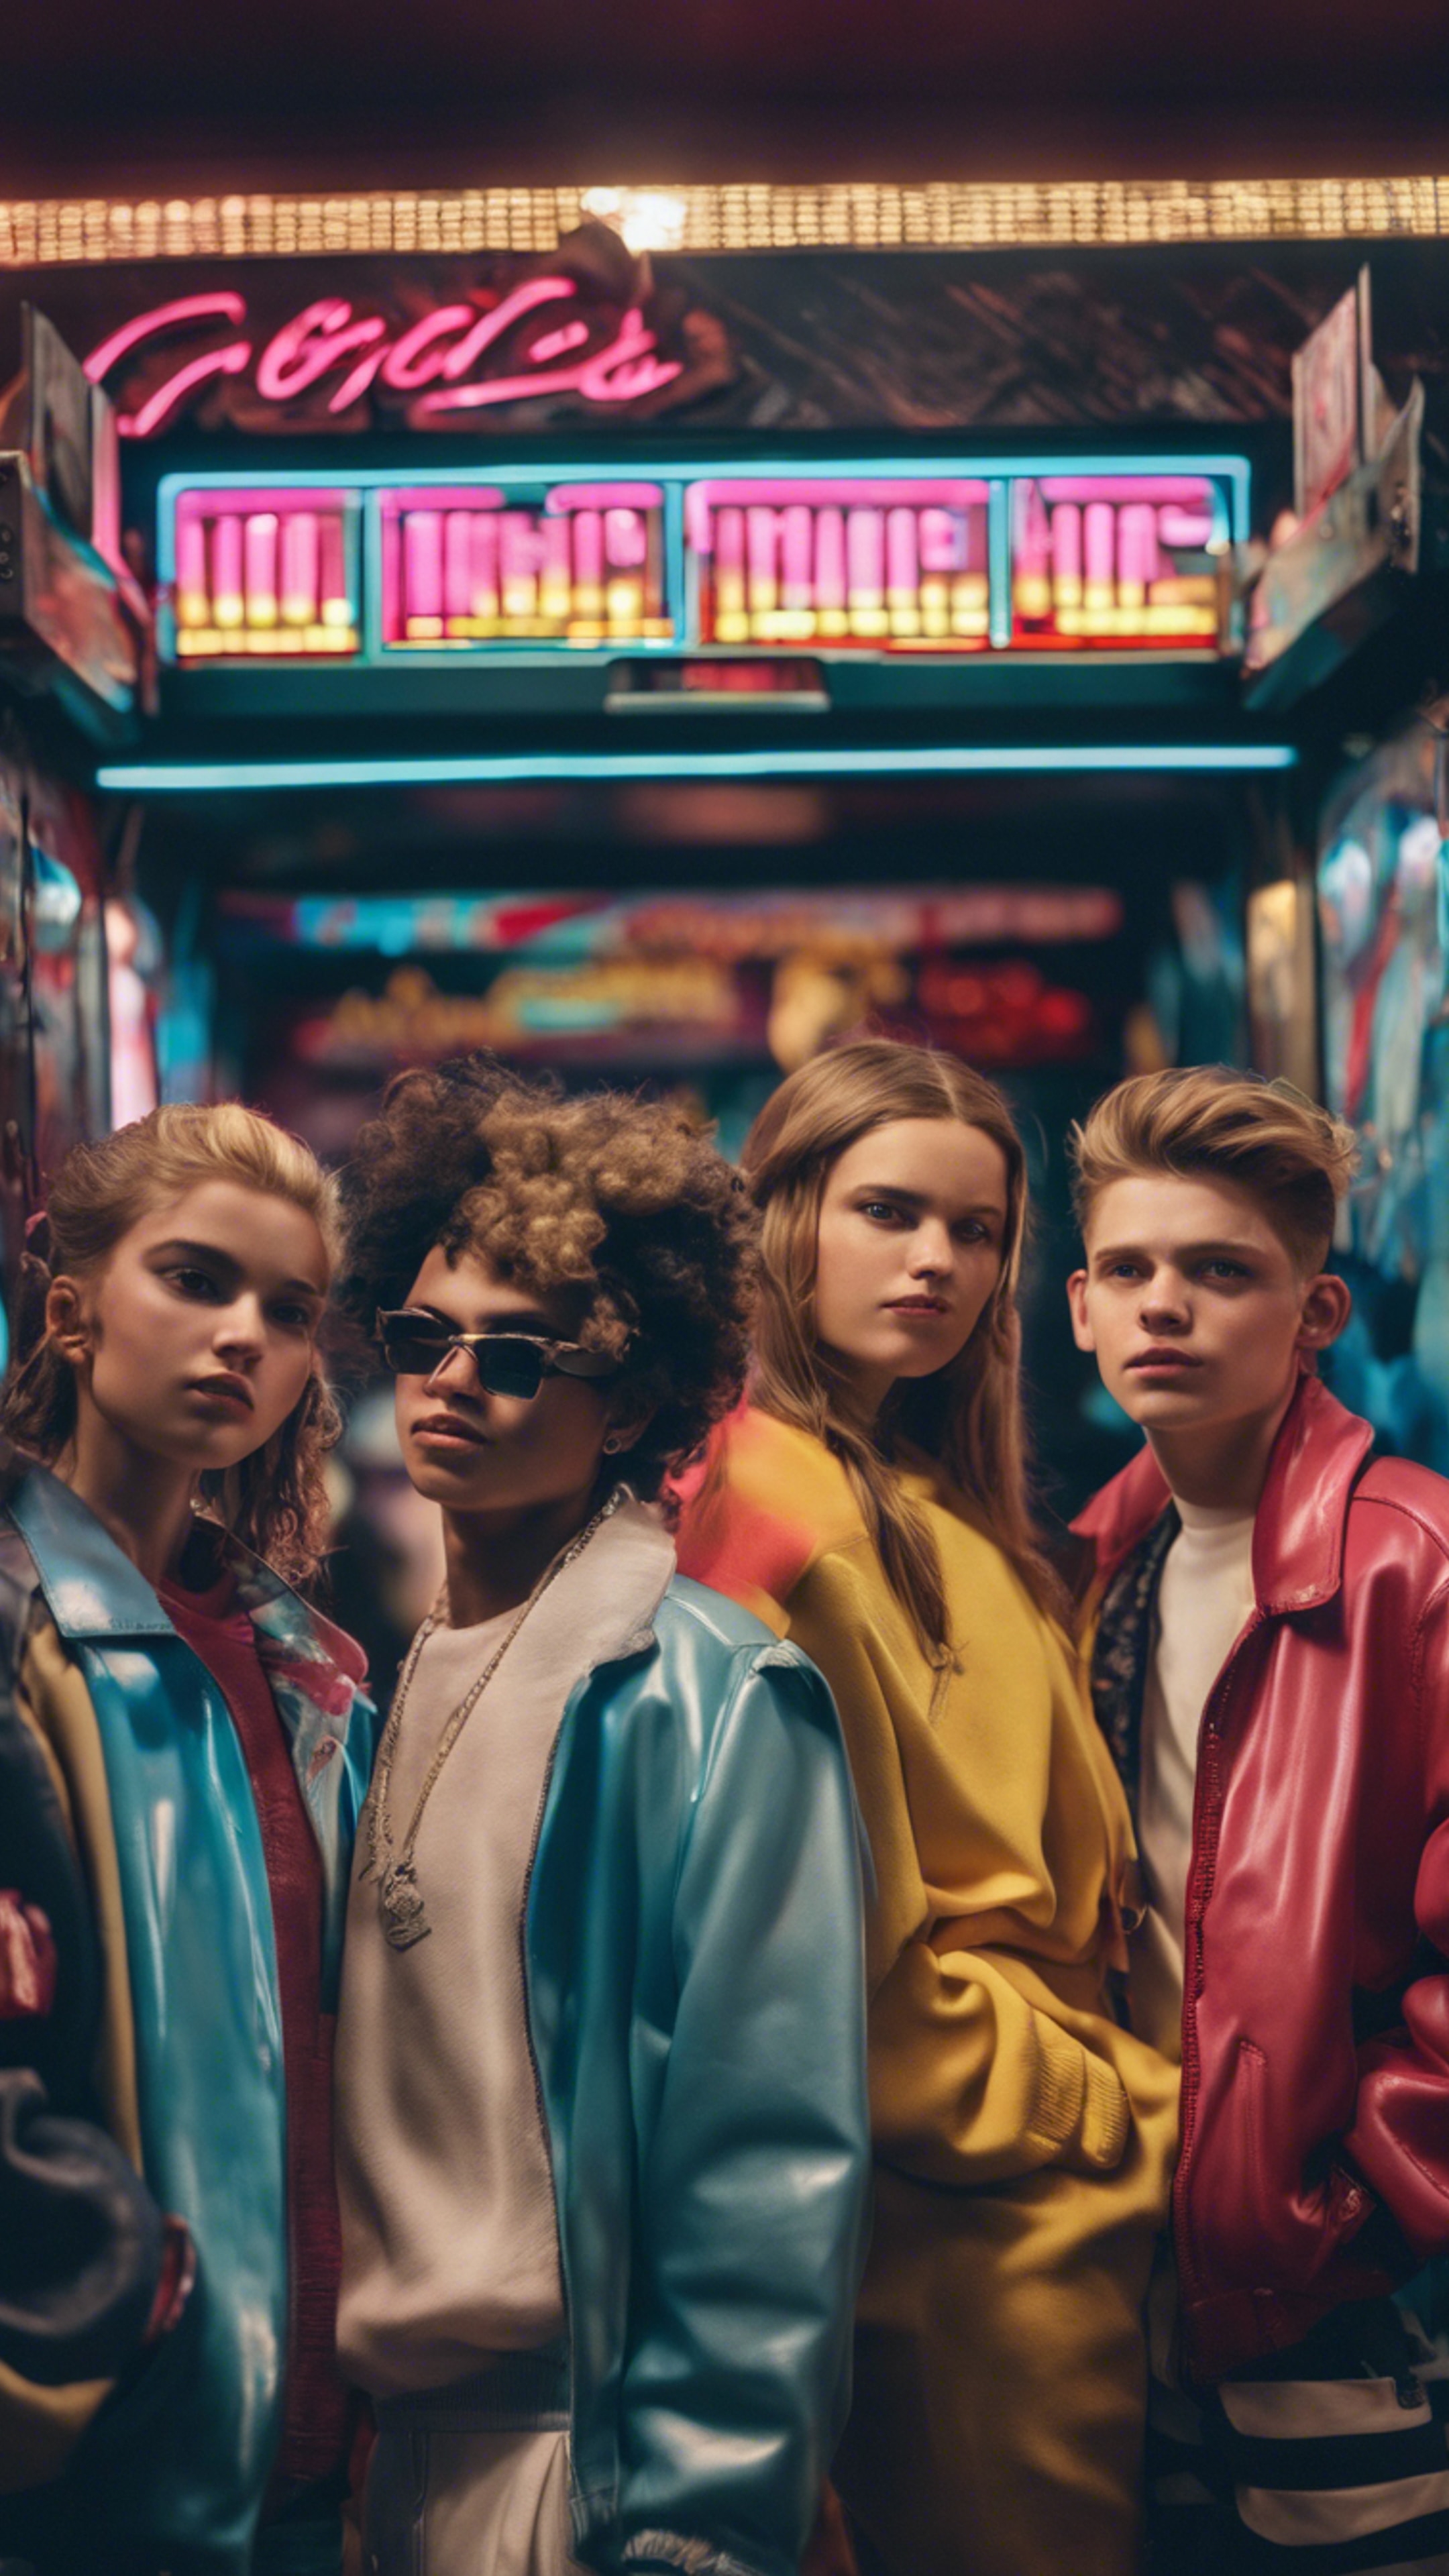 A group of teenagers dressed in iconic 80s fashion, hanging out at an arcade. Шпалери[419df1d215924a4a865f]